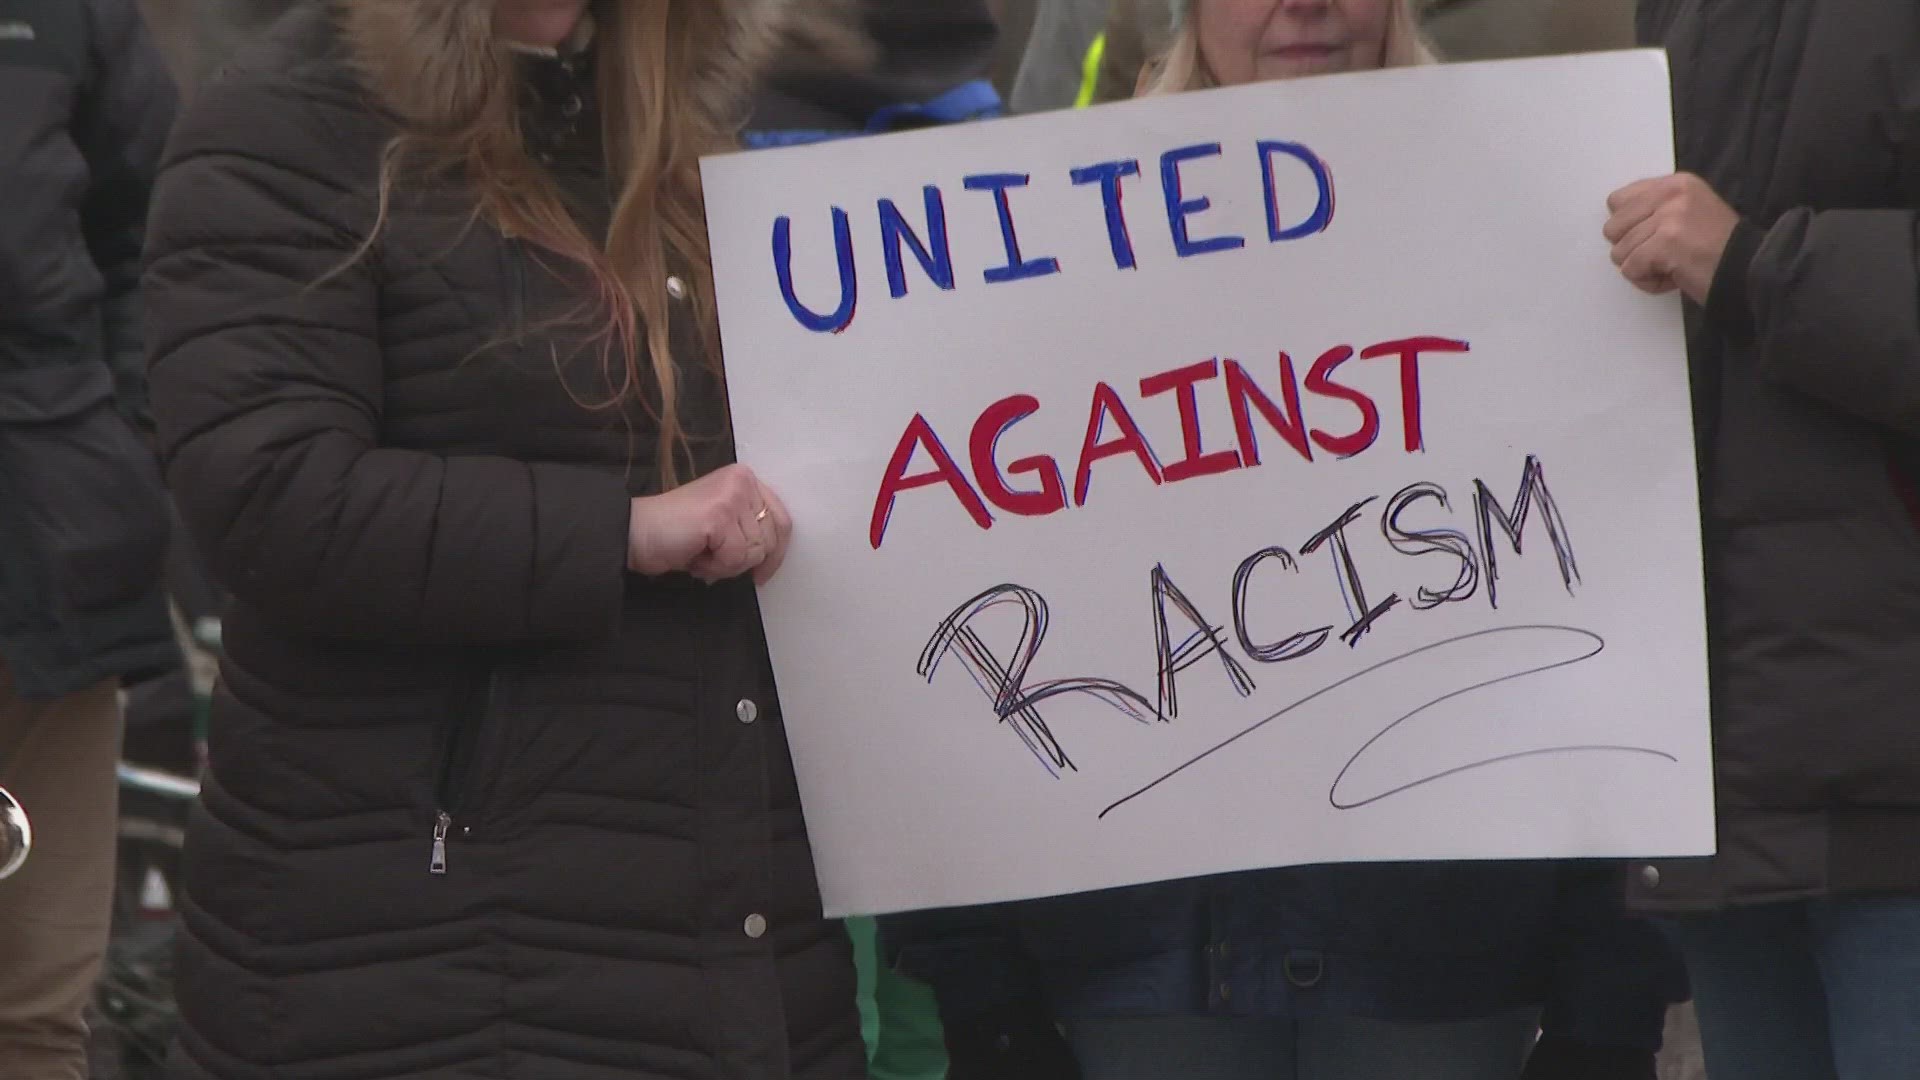 "Say No to Racism" is a monthly event, but it took on a new meaning Friday.